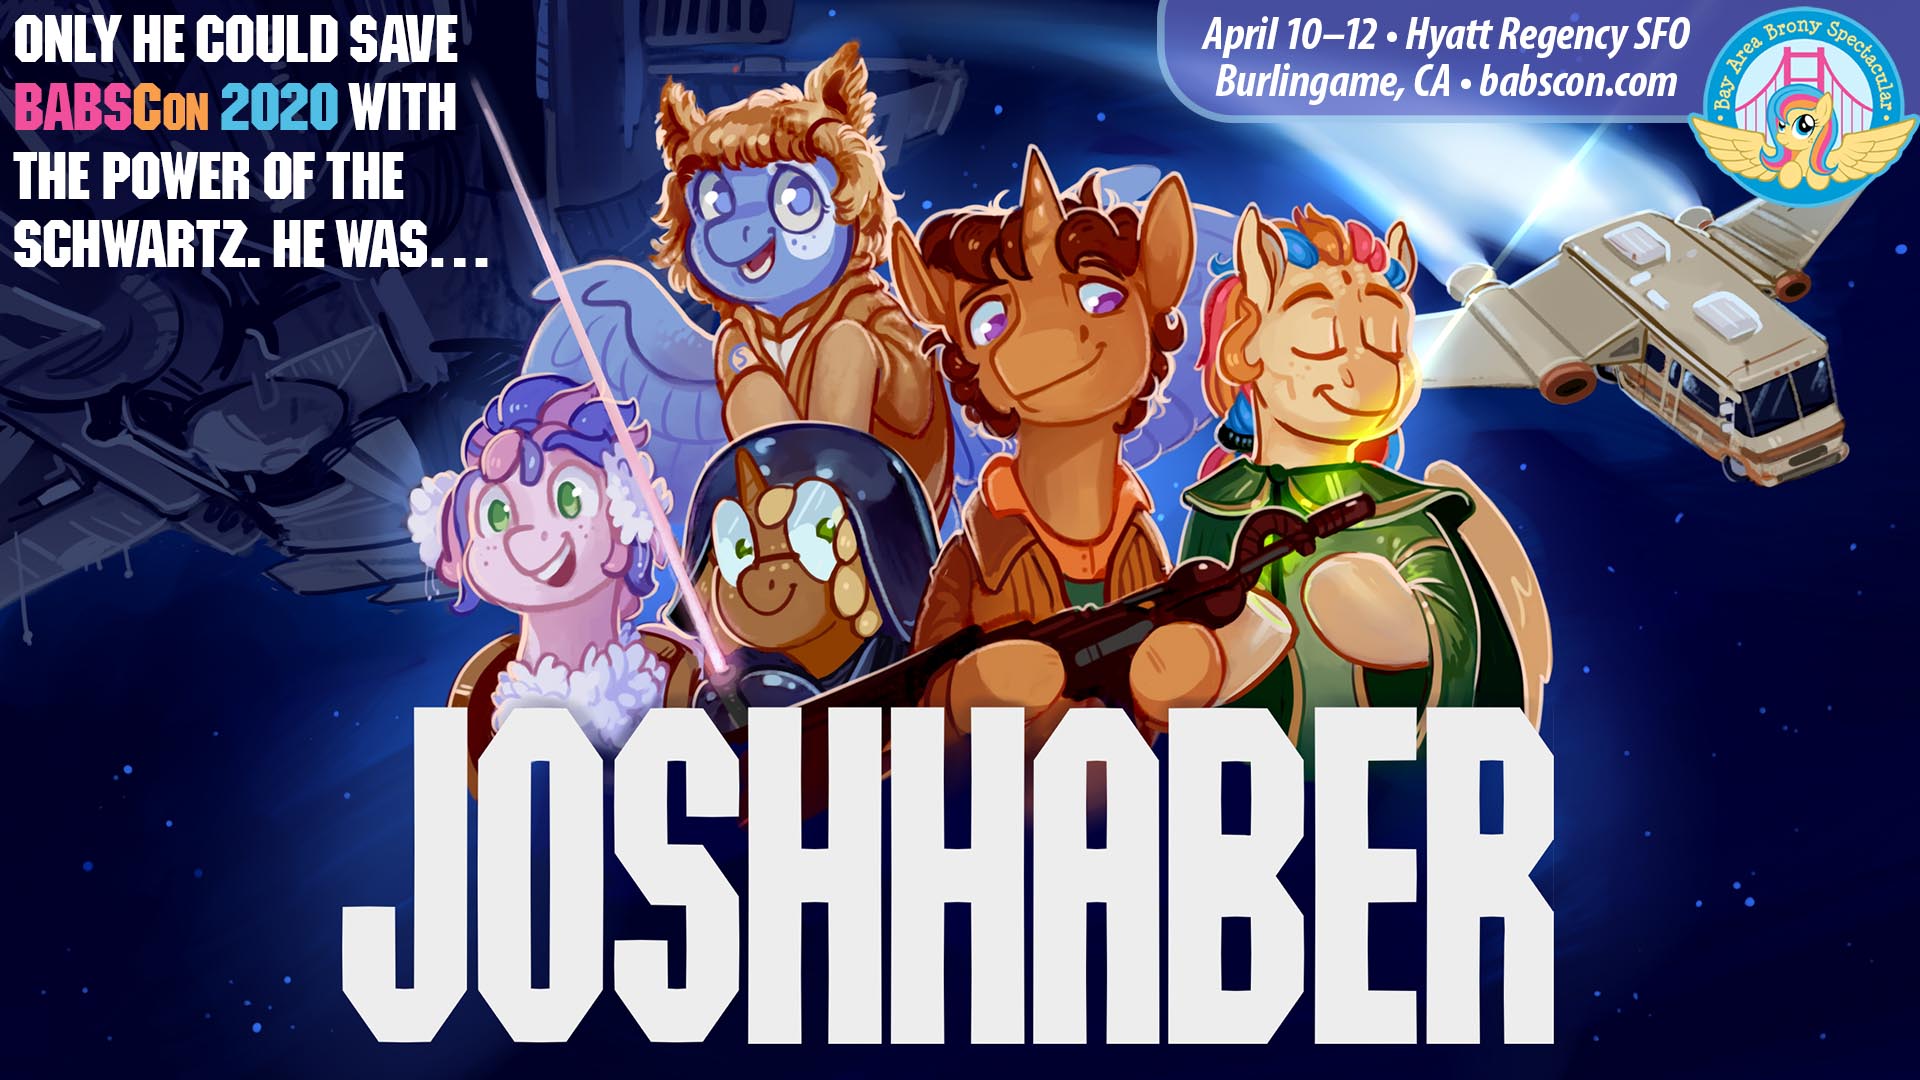 BABSCon Gets On the (Space)Ball with Josh Haber!